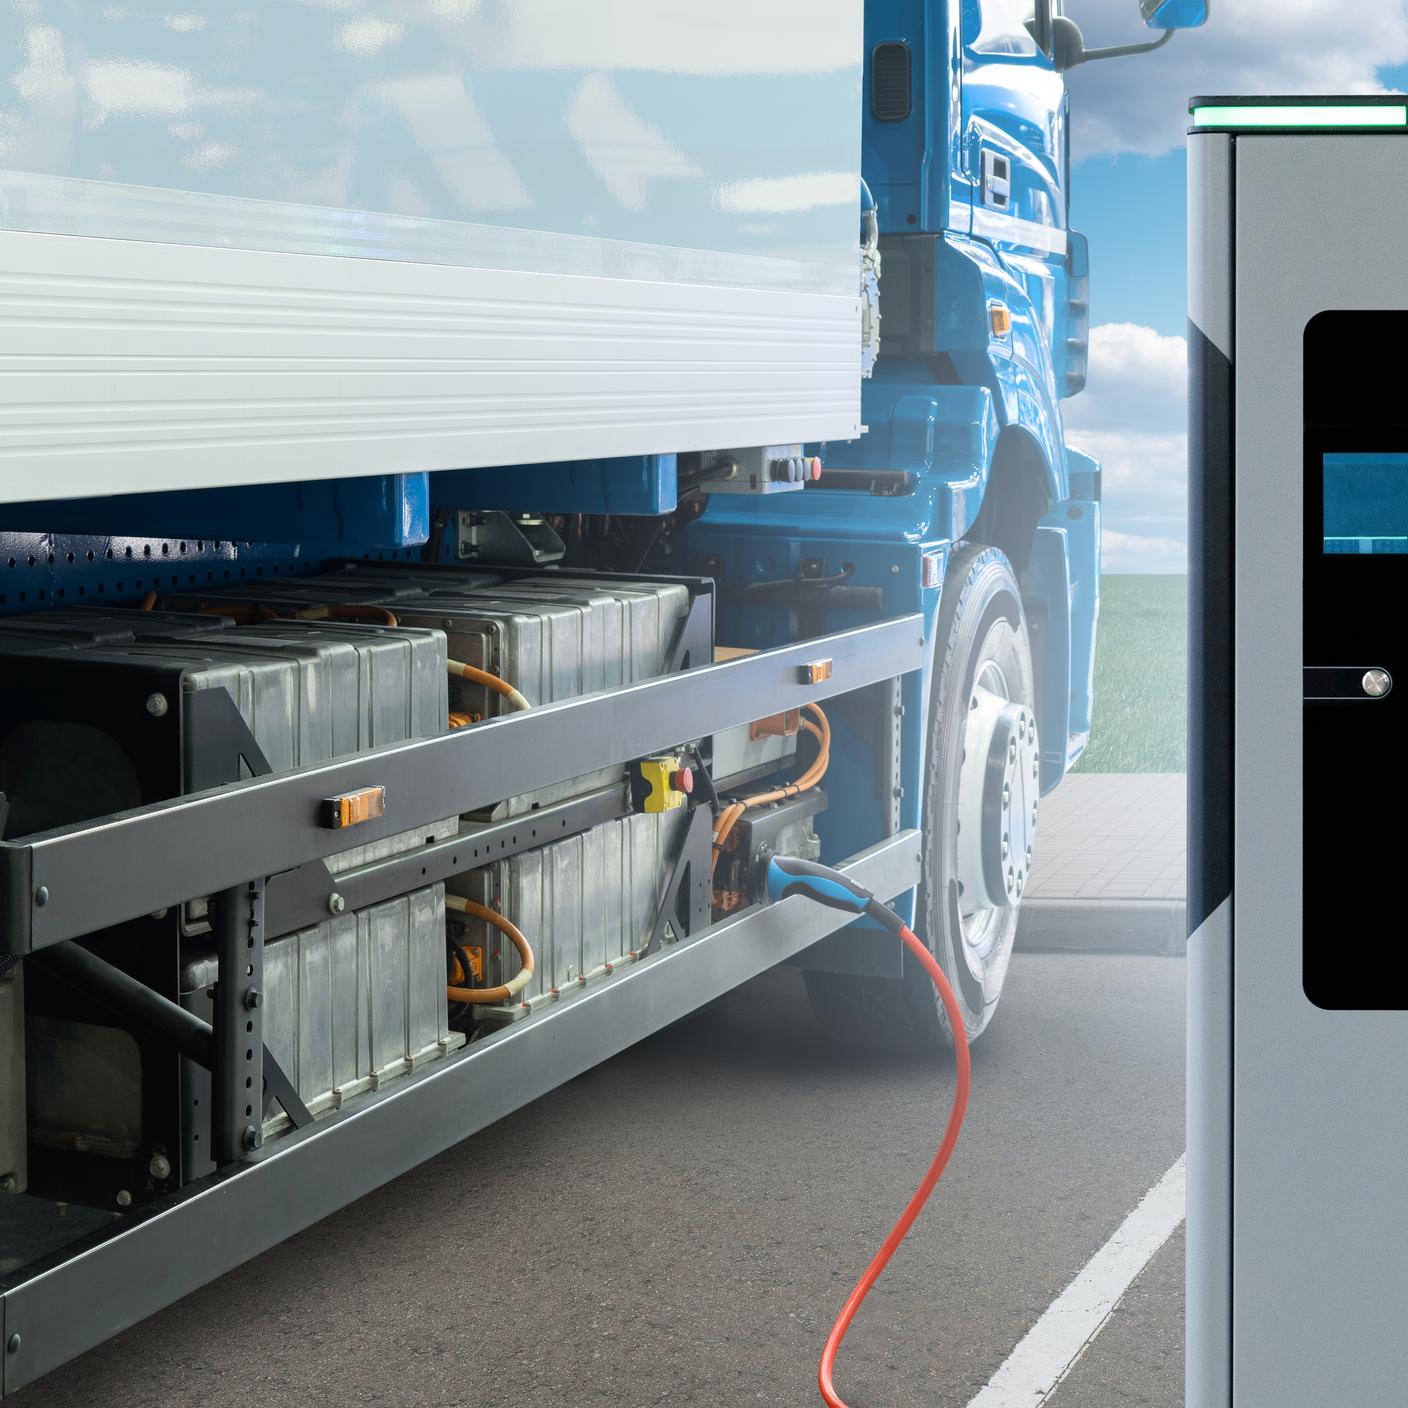 Electric truck batteries are charged from the charging station